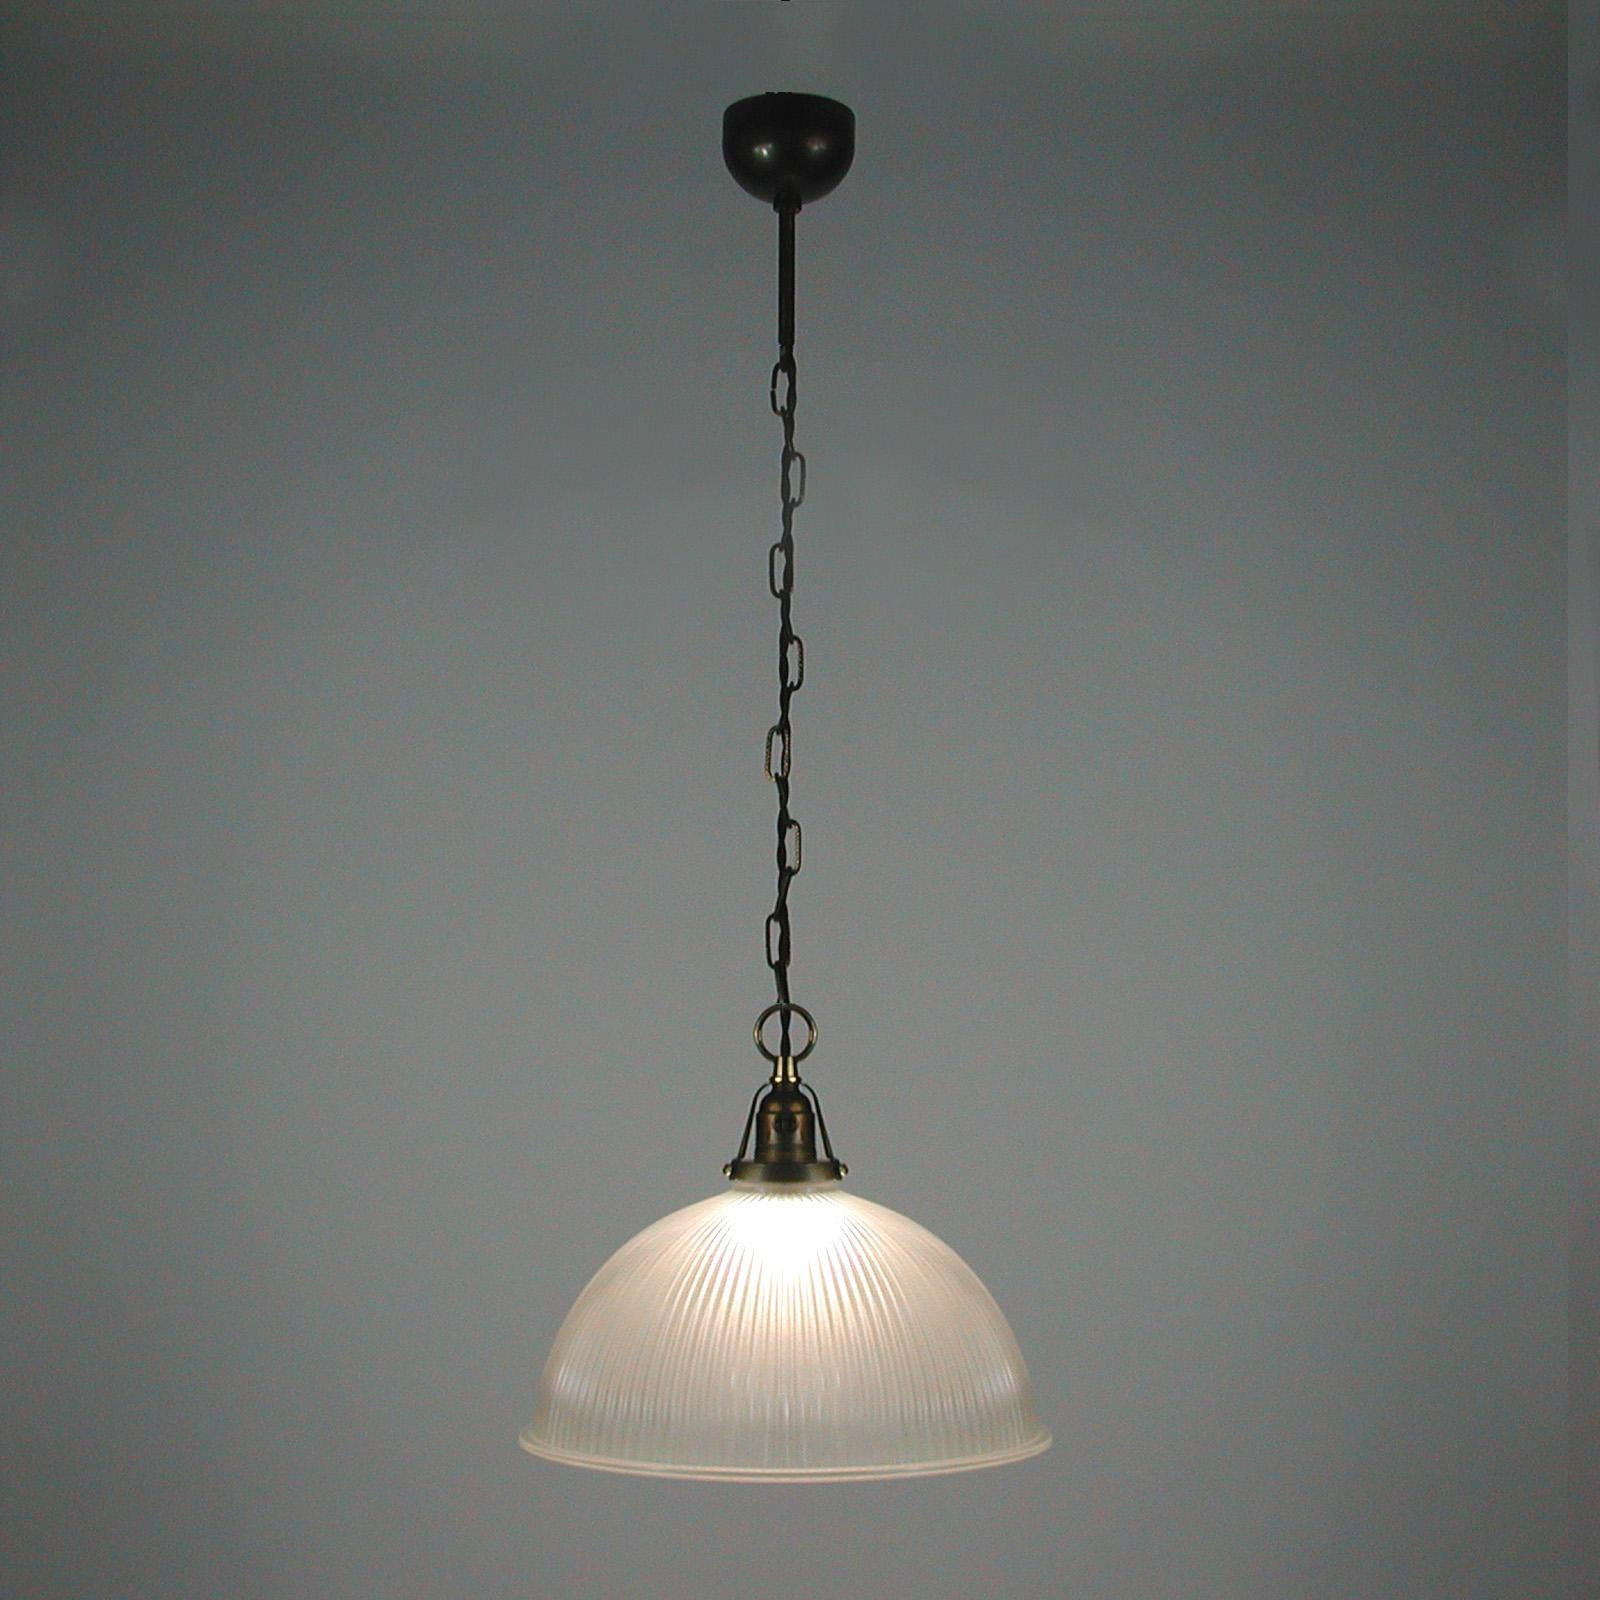 This industrial Art Deco dome shaped pendant light was manufactured in France in the 1930s. It features a clear prismatic glass Holophane lamp shade and patinated brass glass holder, chain and canopy. 

The glass gives off the best quality light.